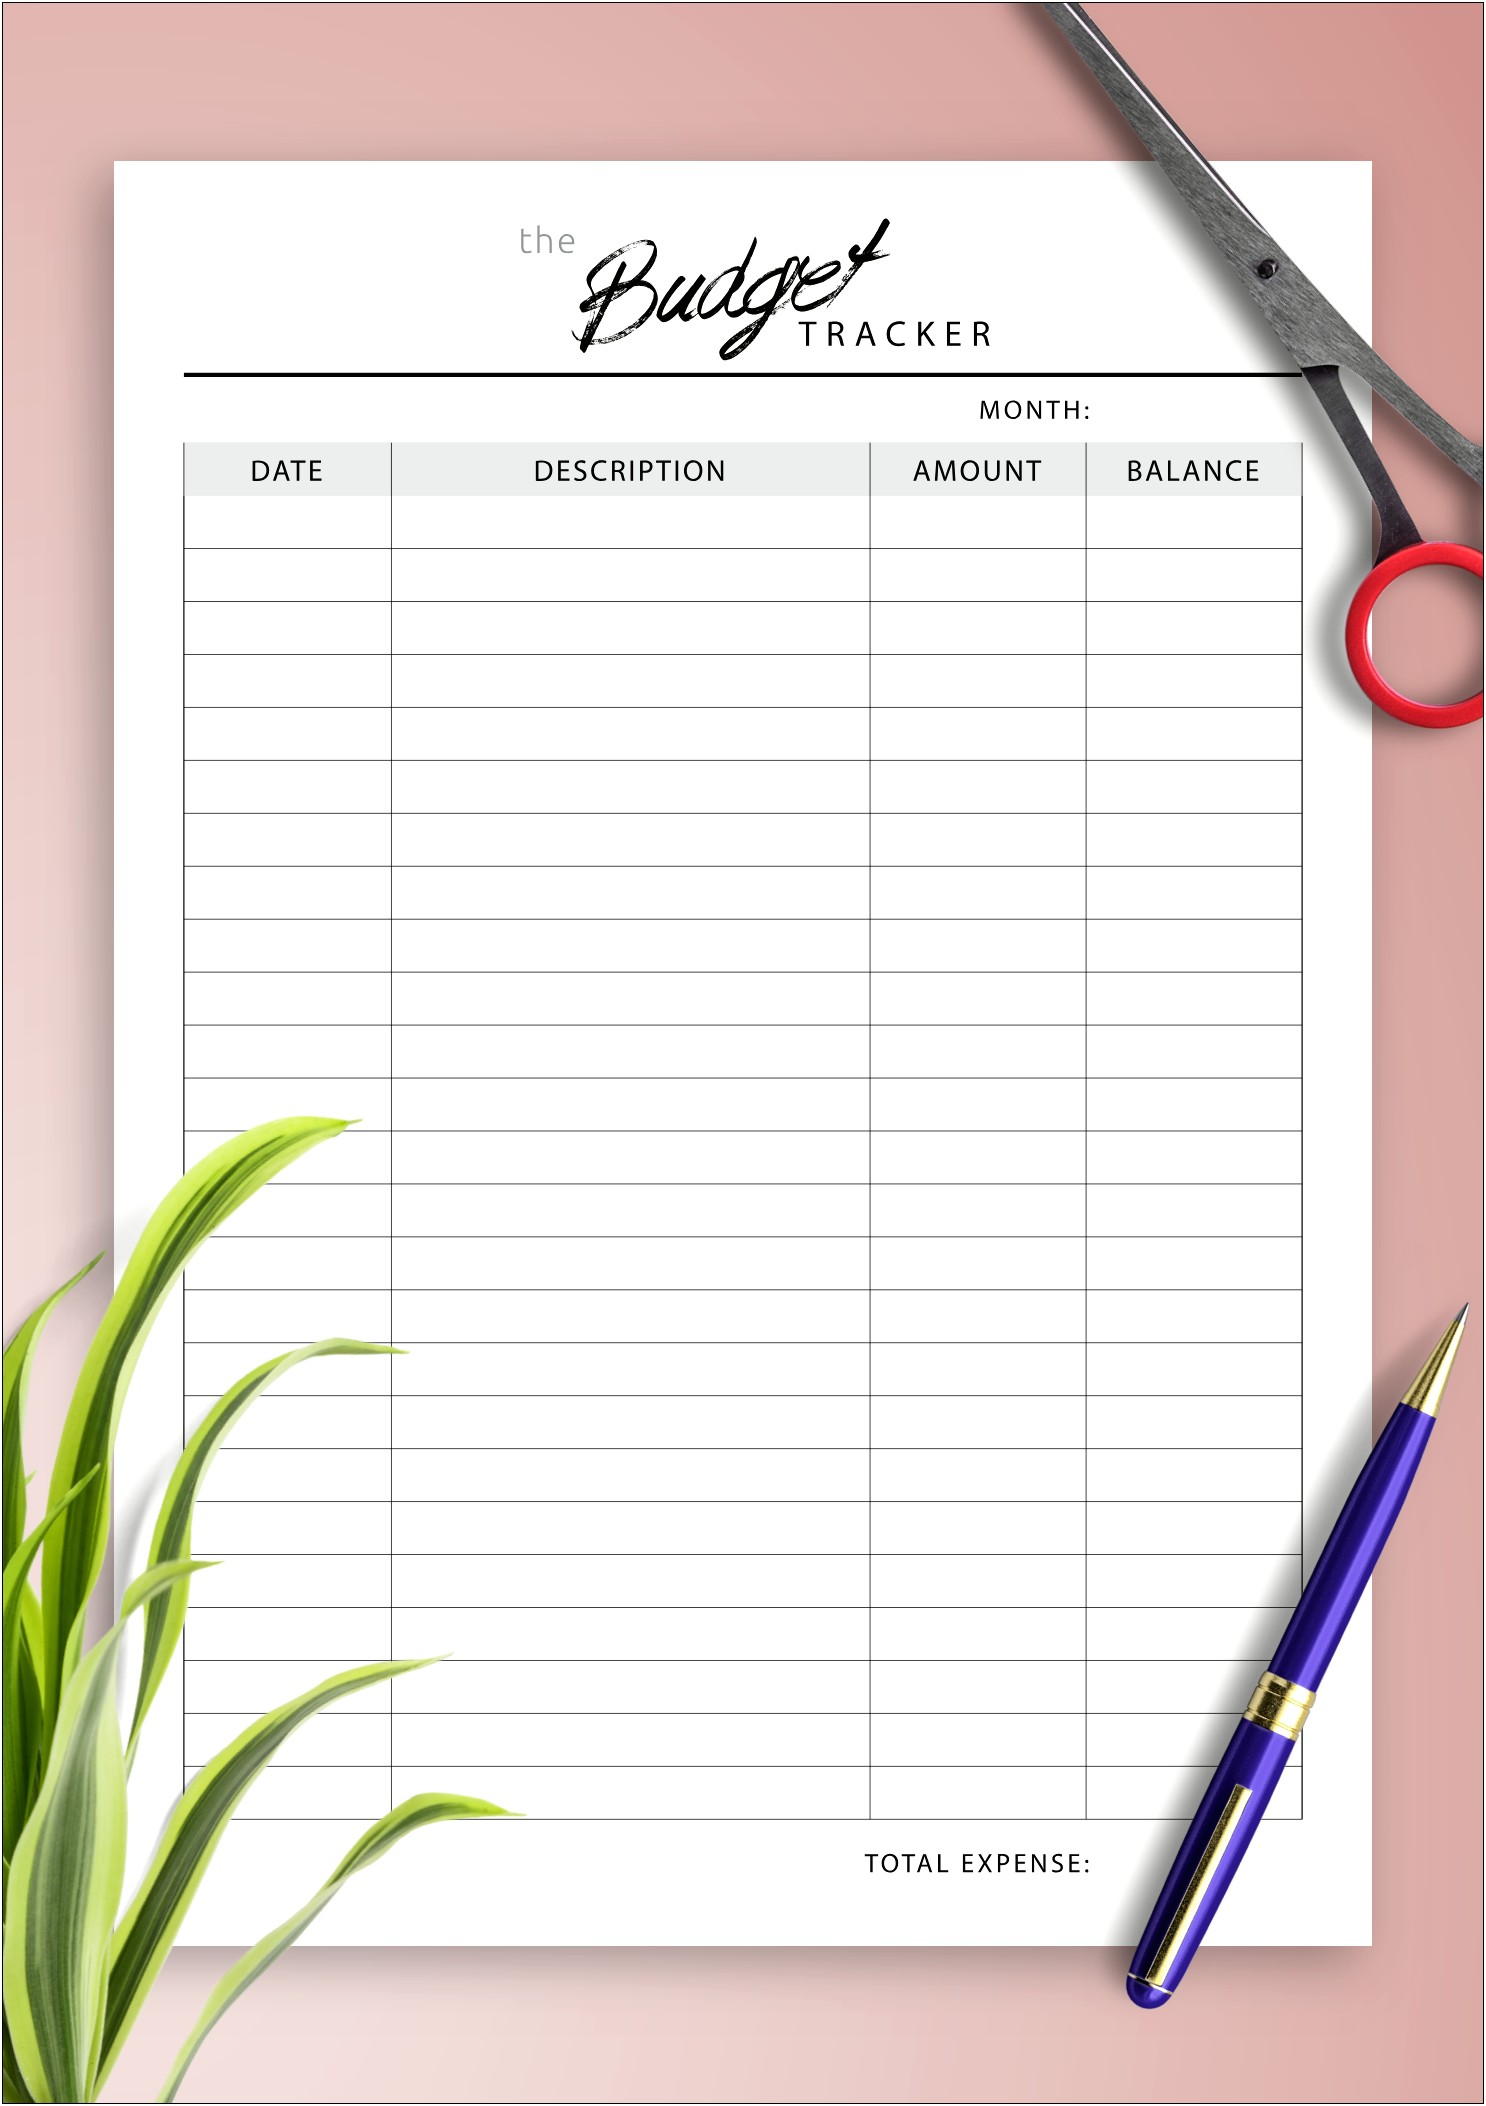 Monthly Household Budget Template Free Printable